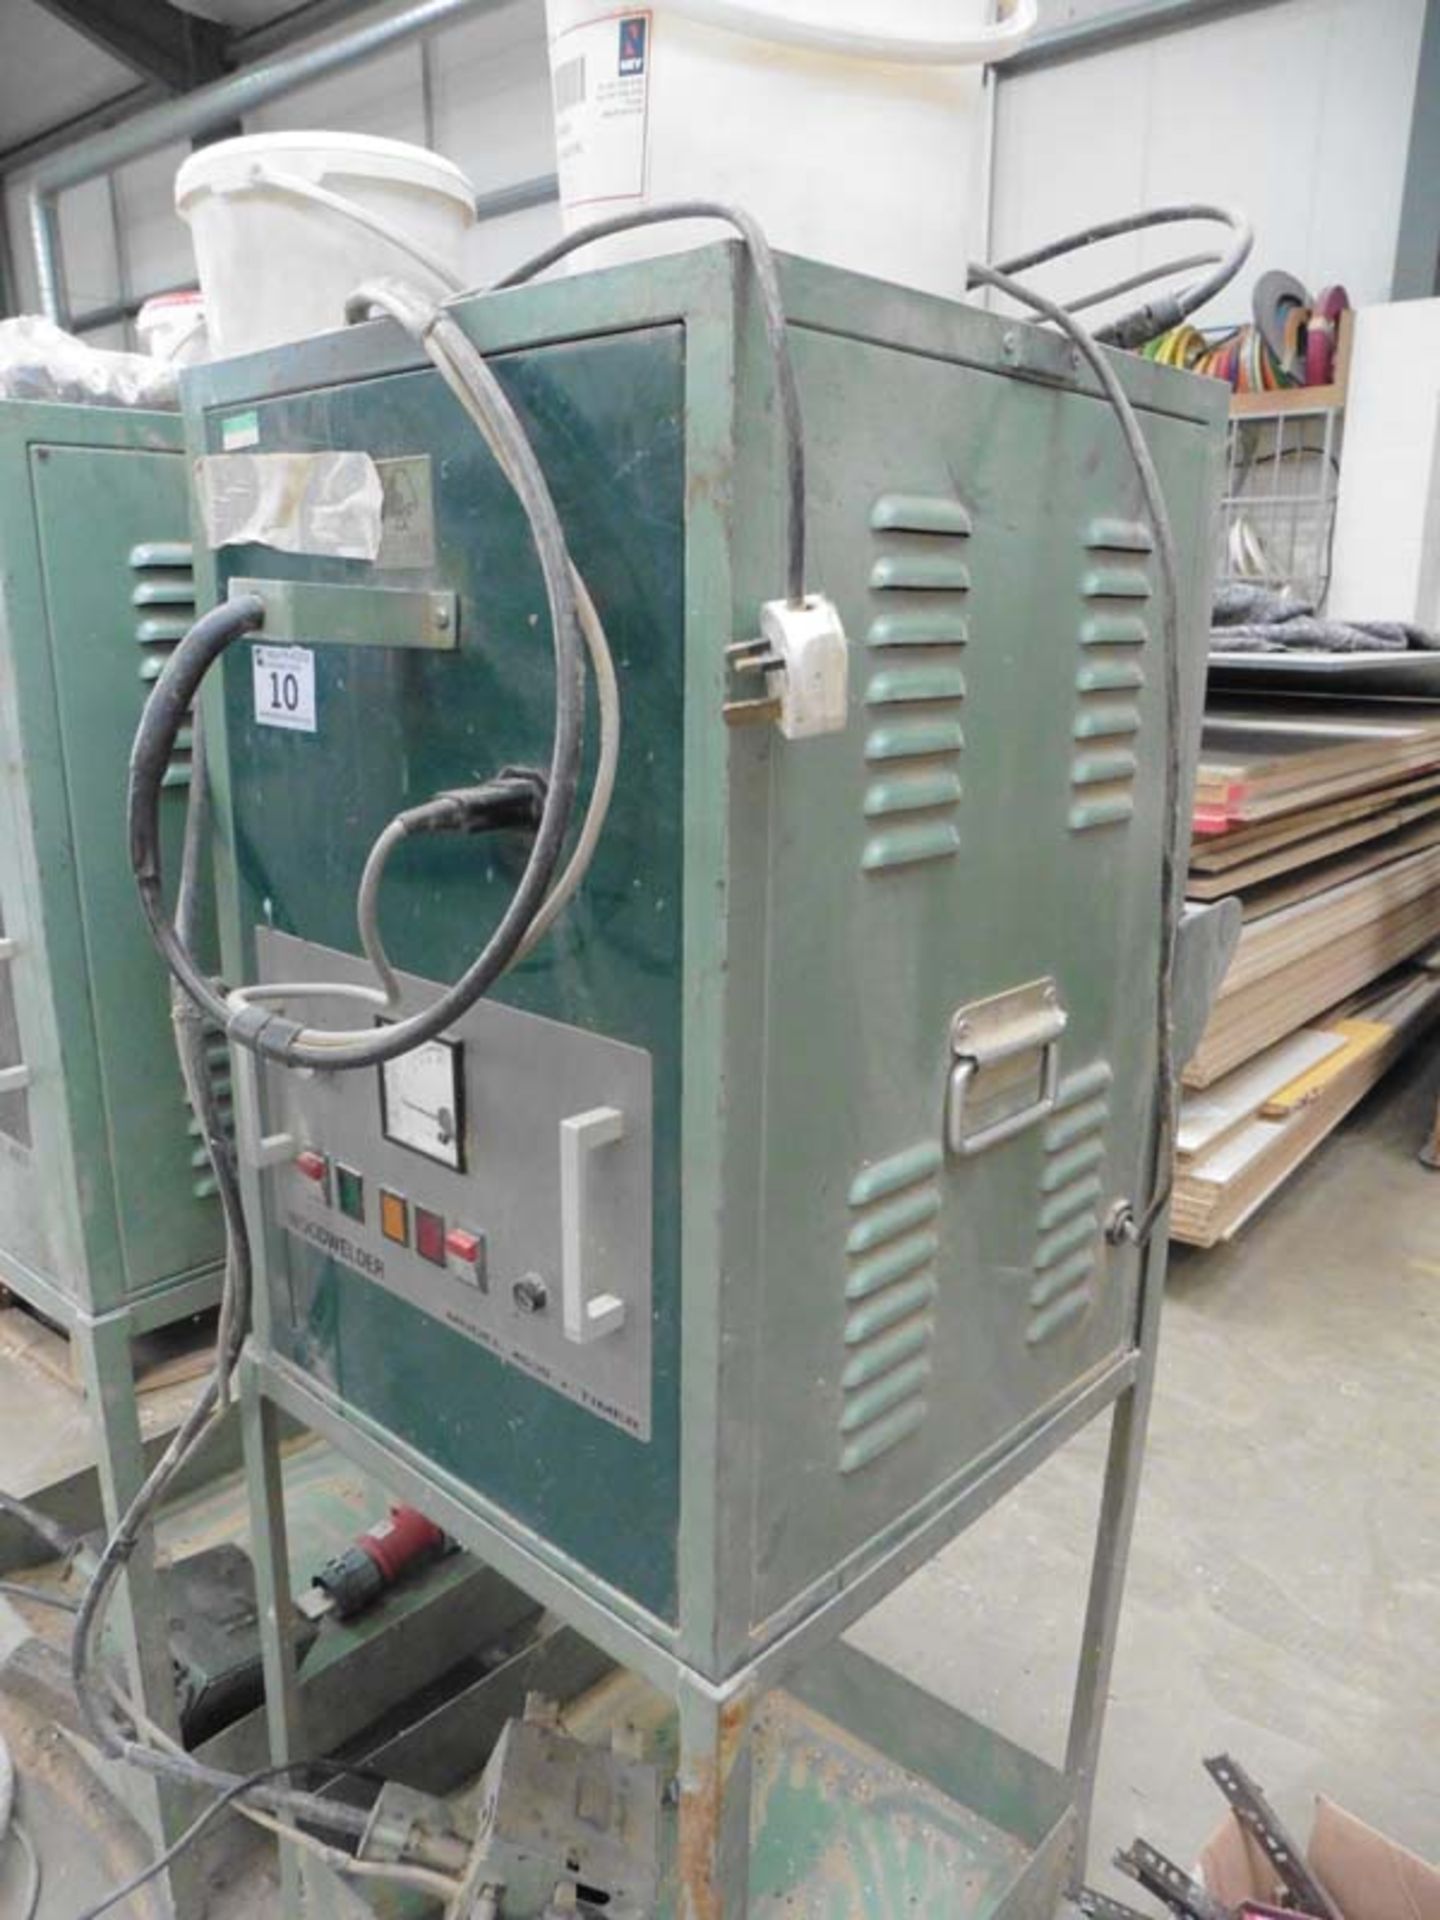 Woodwelder model 4000, plus timer by Tregarne high-frequency curing machine - Image 2 of 3